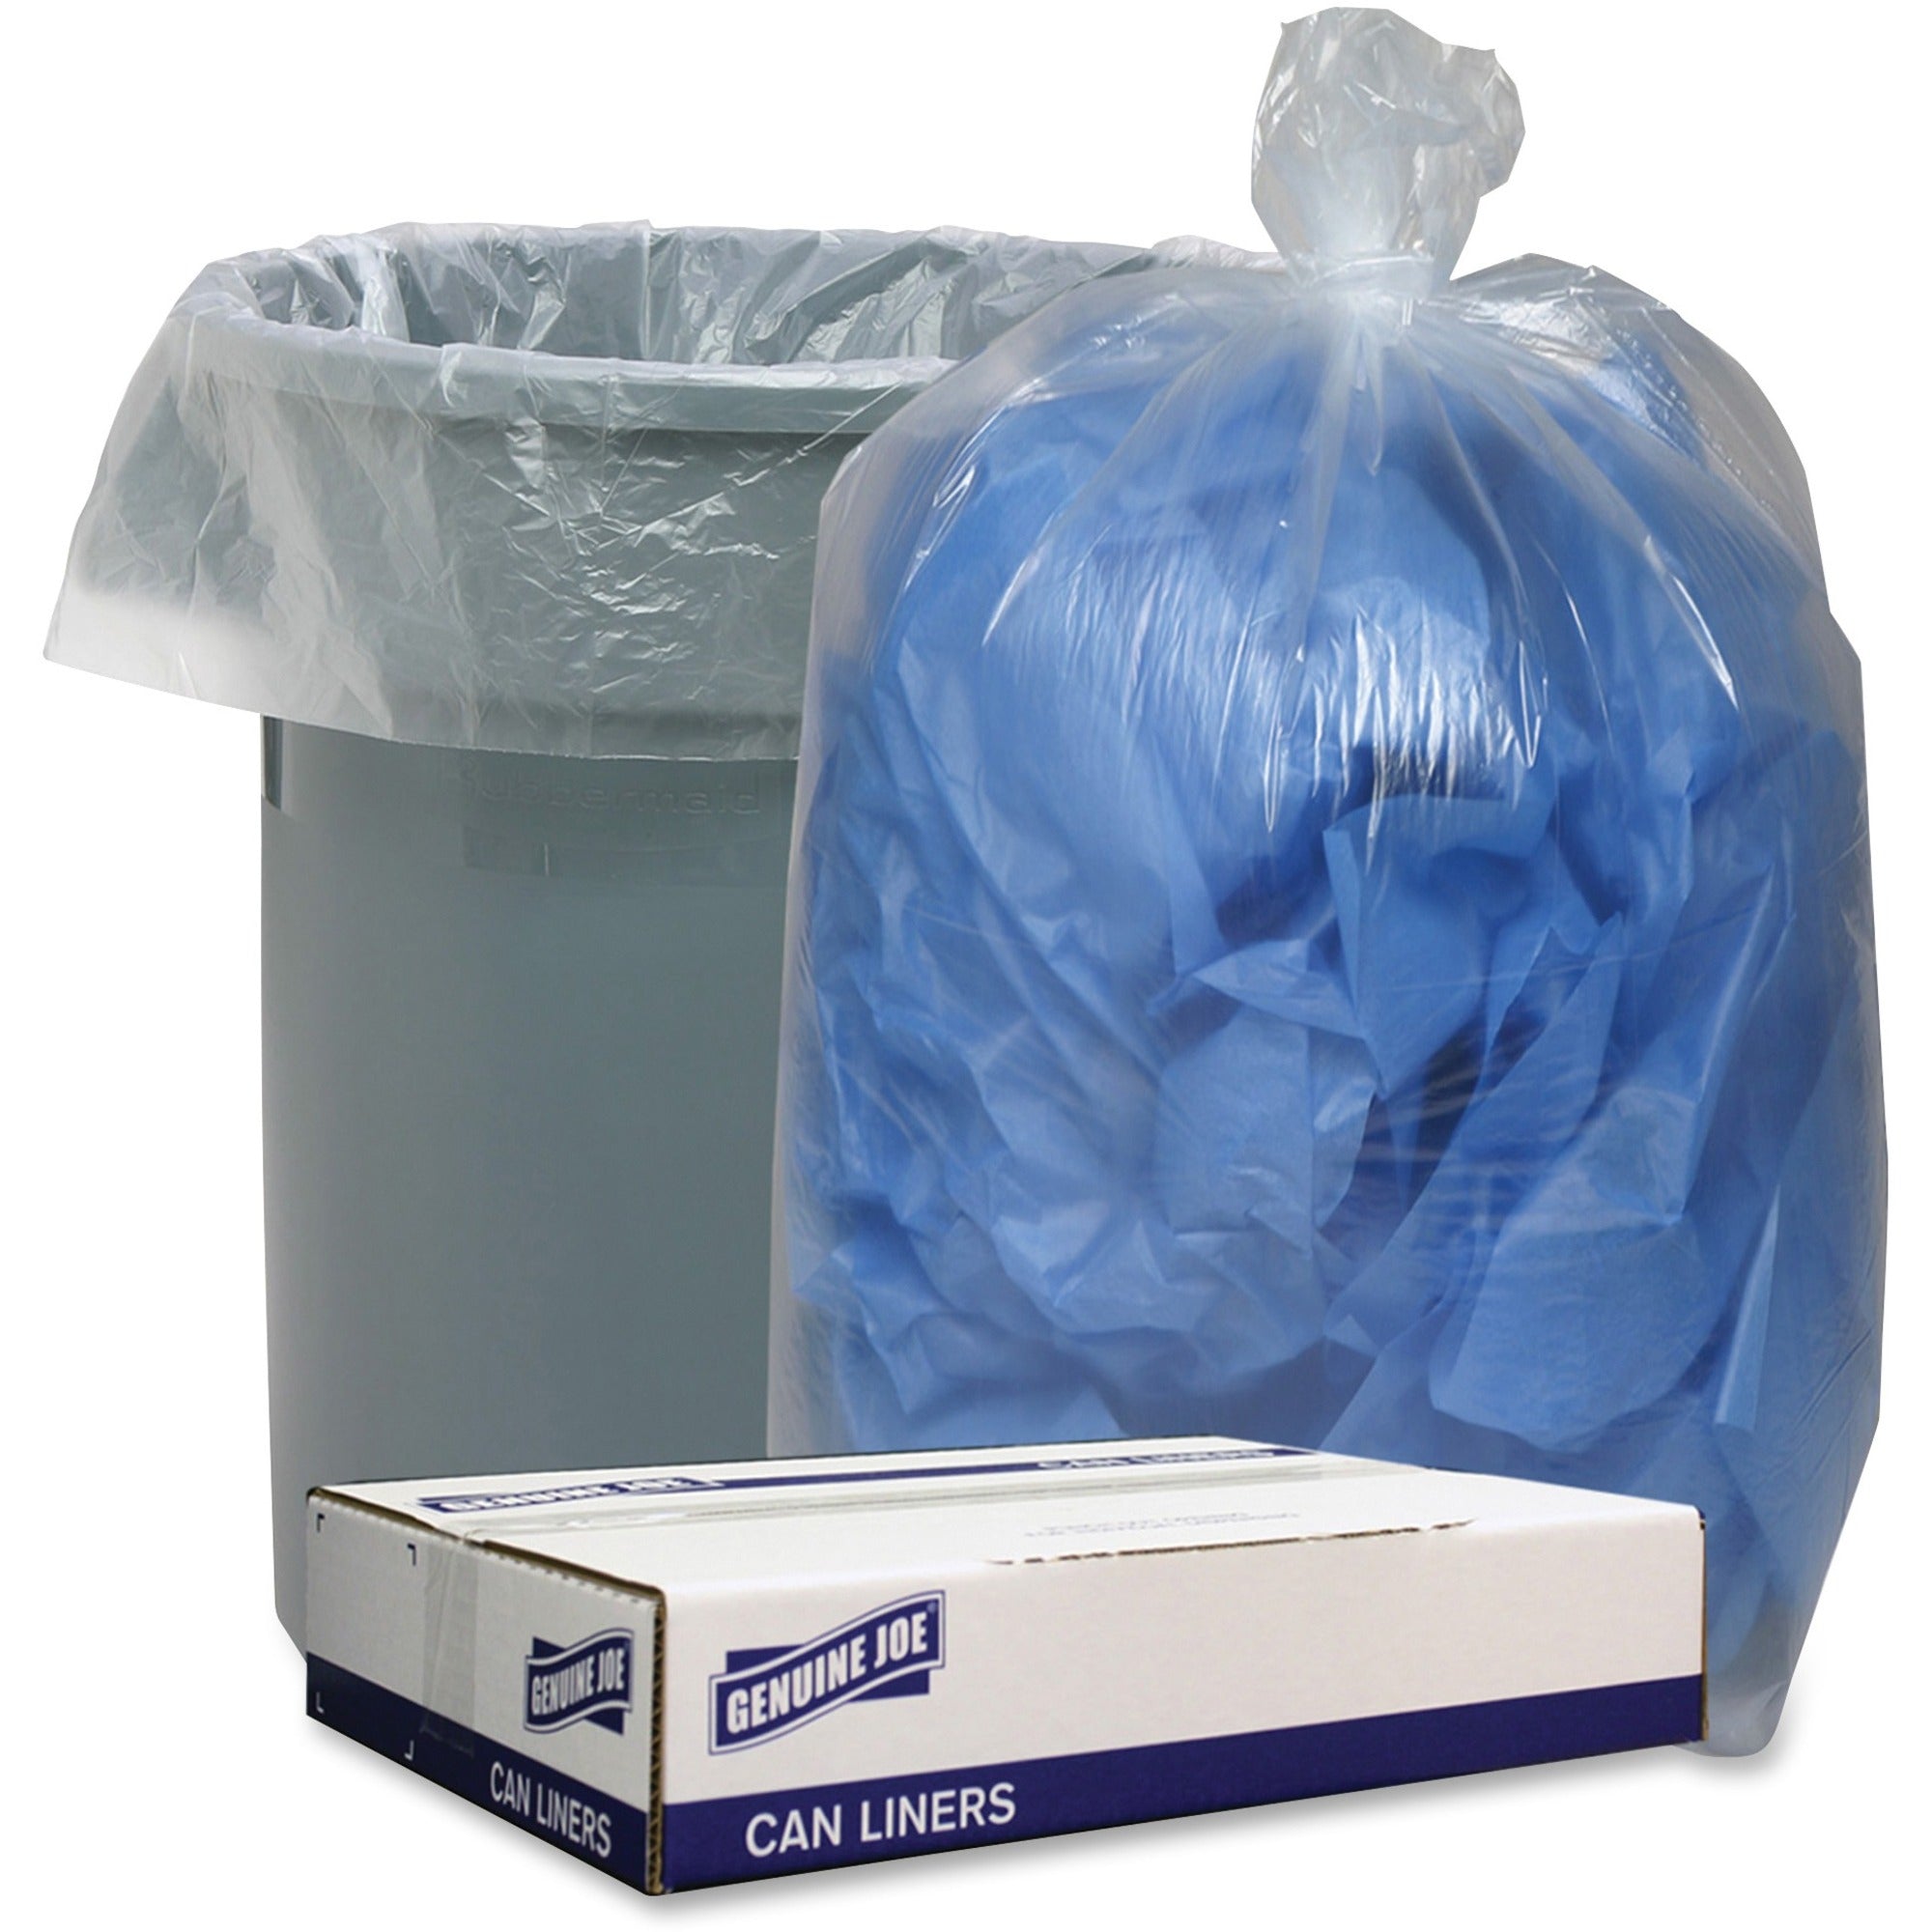 genuine-joe-low-density-can-liners-56-gal-capacity-43-width-x-47-length-140-mil-36-micron-thickness-low-density-clear-100-carton-recycled_gjo29132 - 1